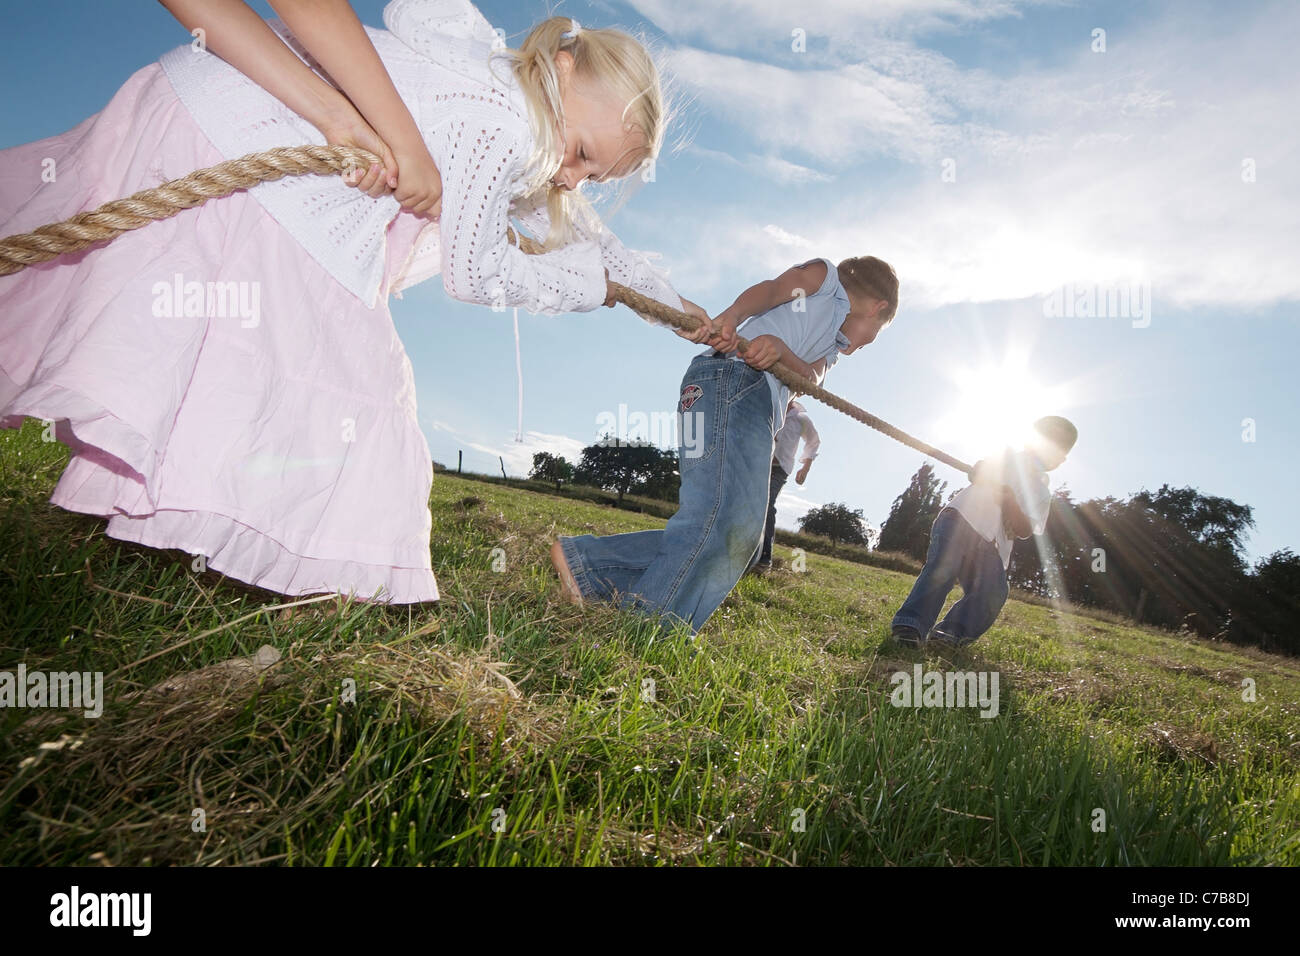 Children playing tug-of-war on a meadow in summer, Eyendorf, Lower Saxony, Germany, Europe Stock Photo